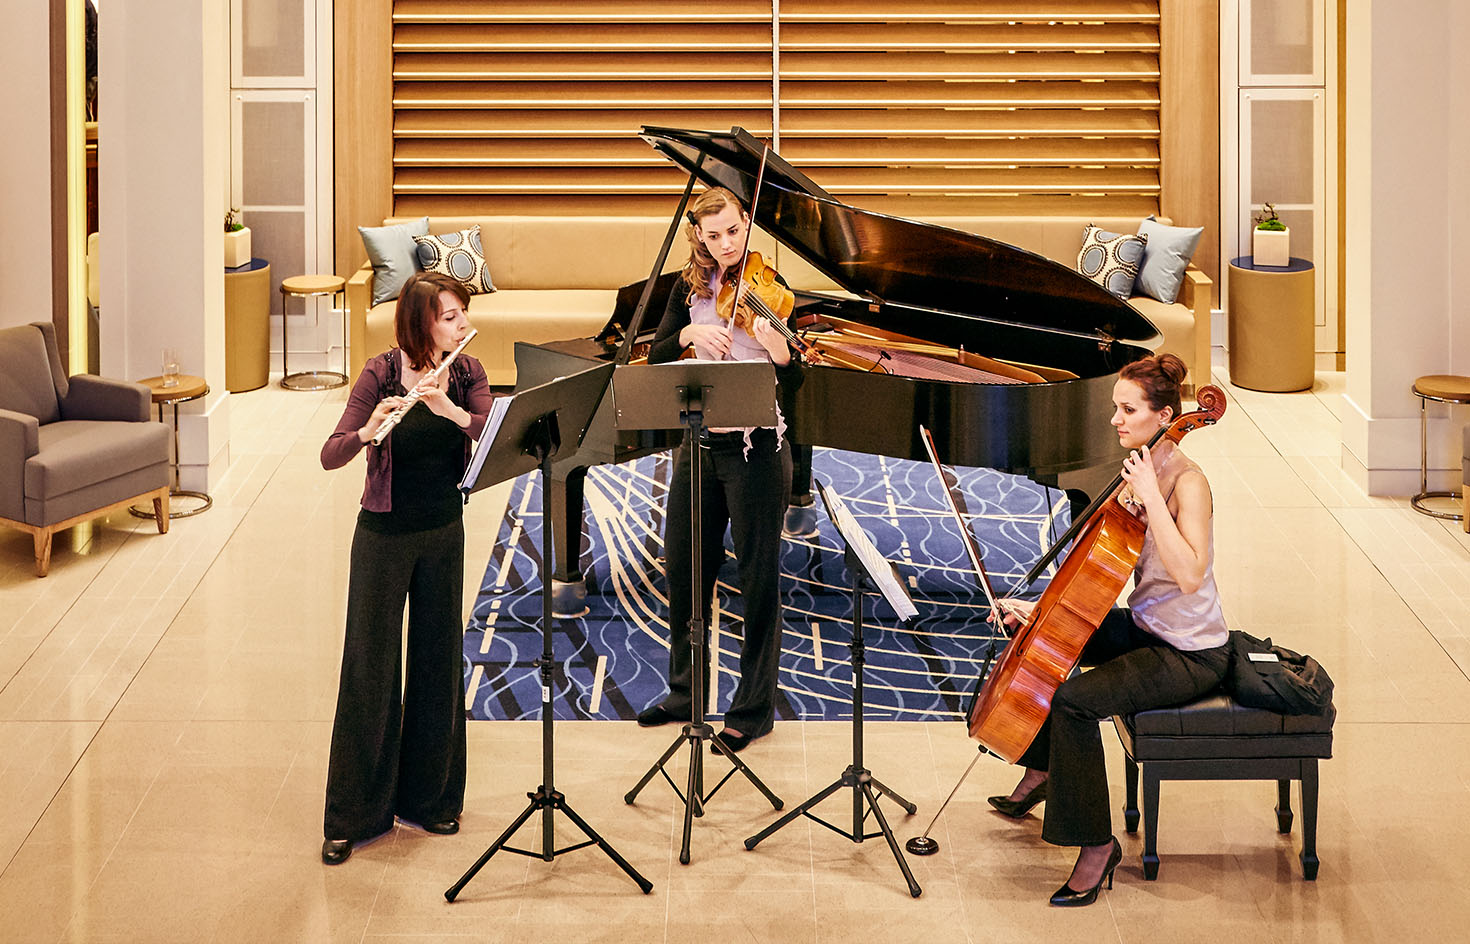 Three women performing music in front of a piano